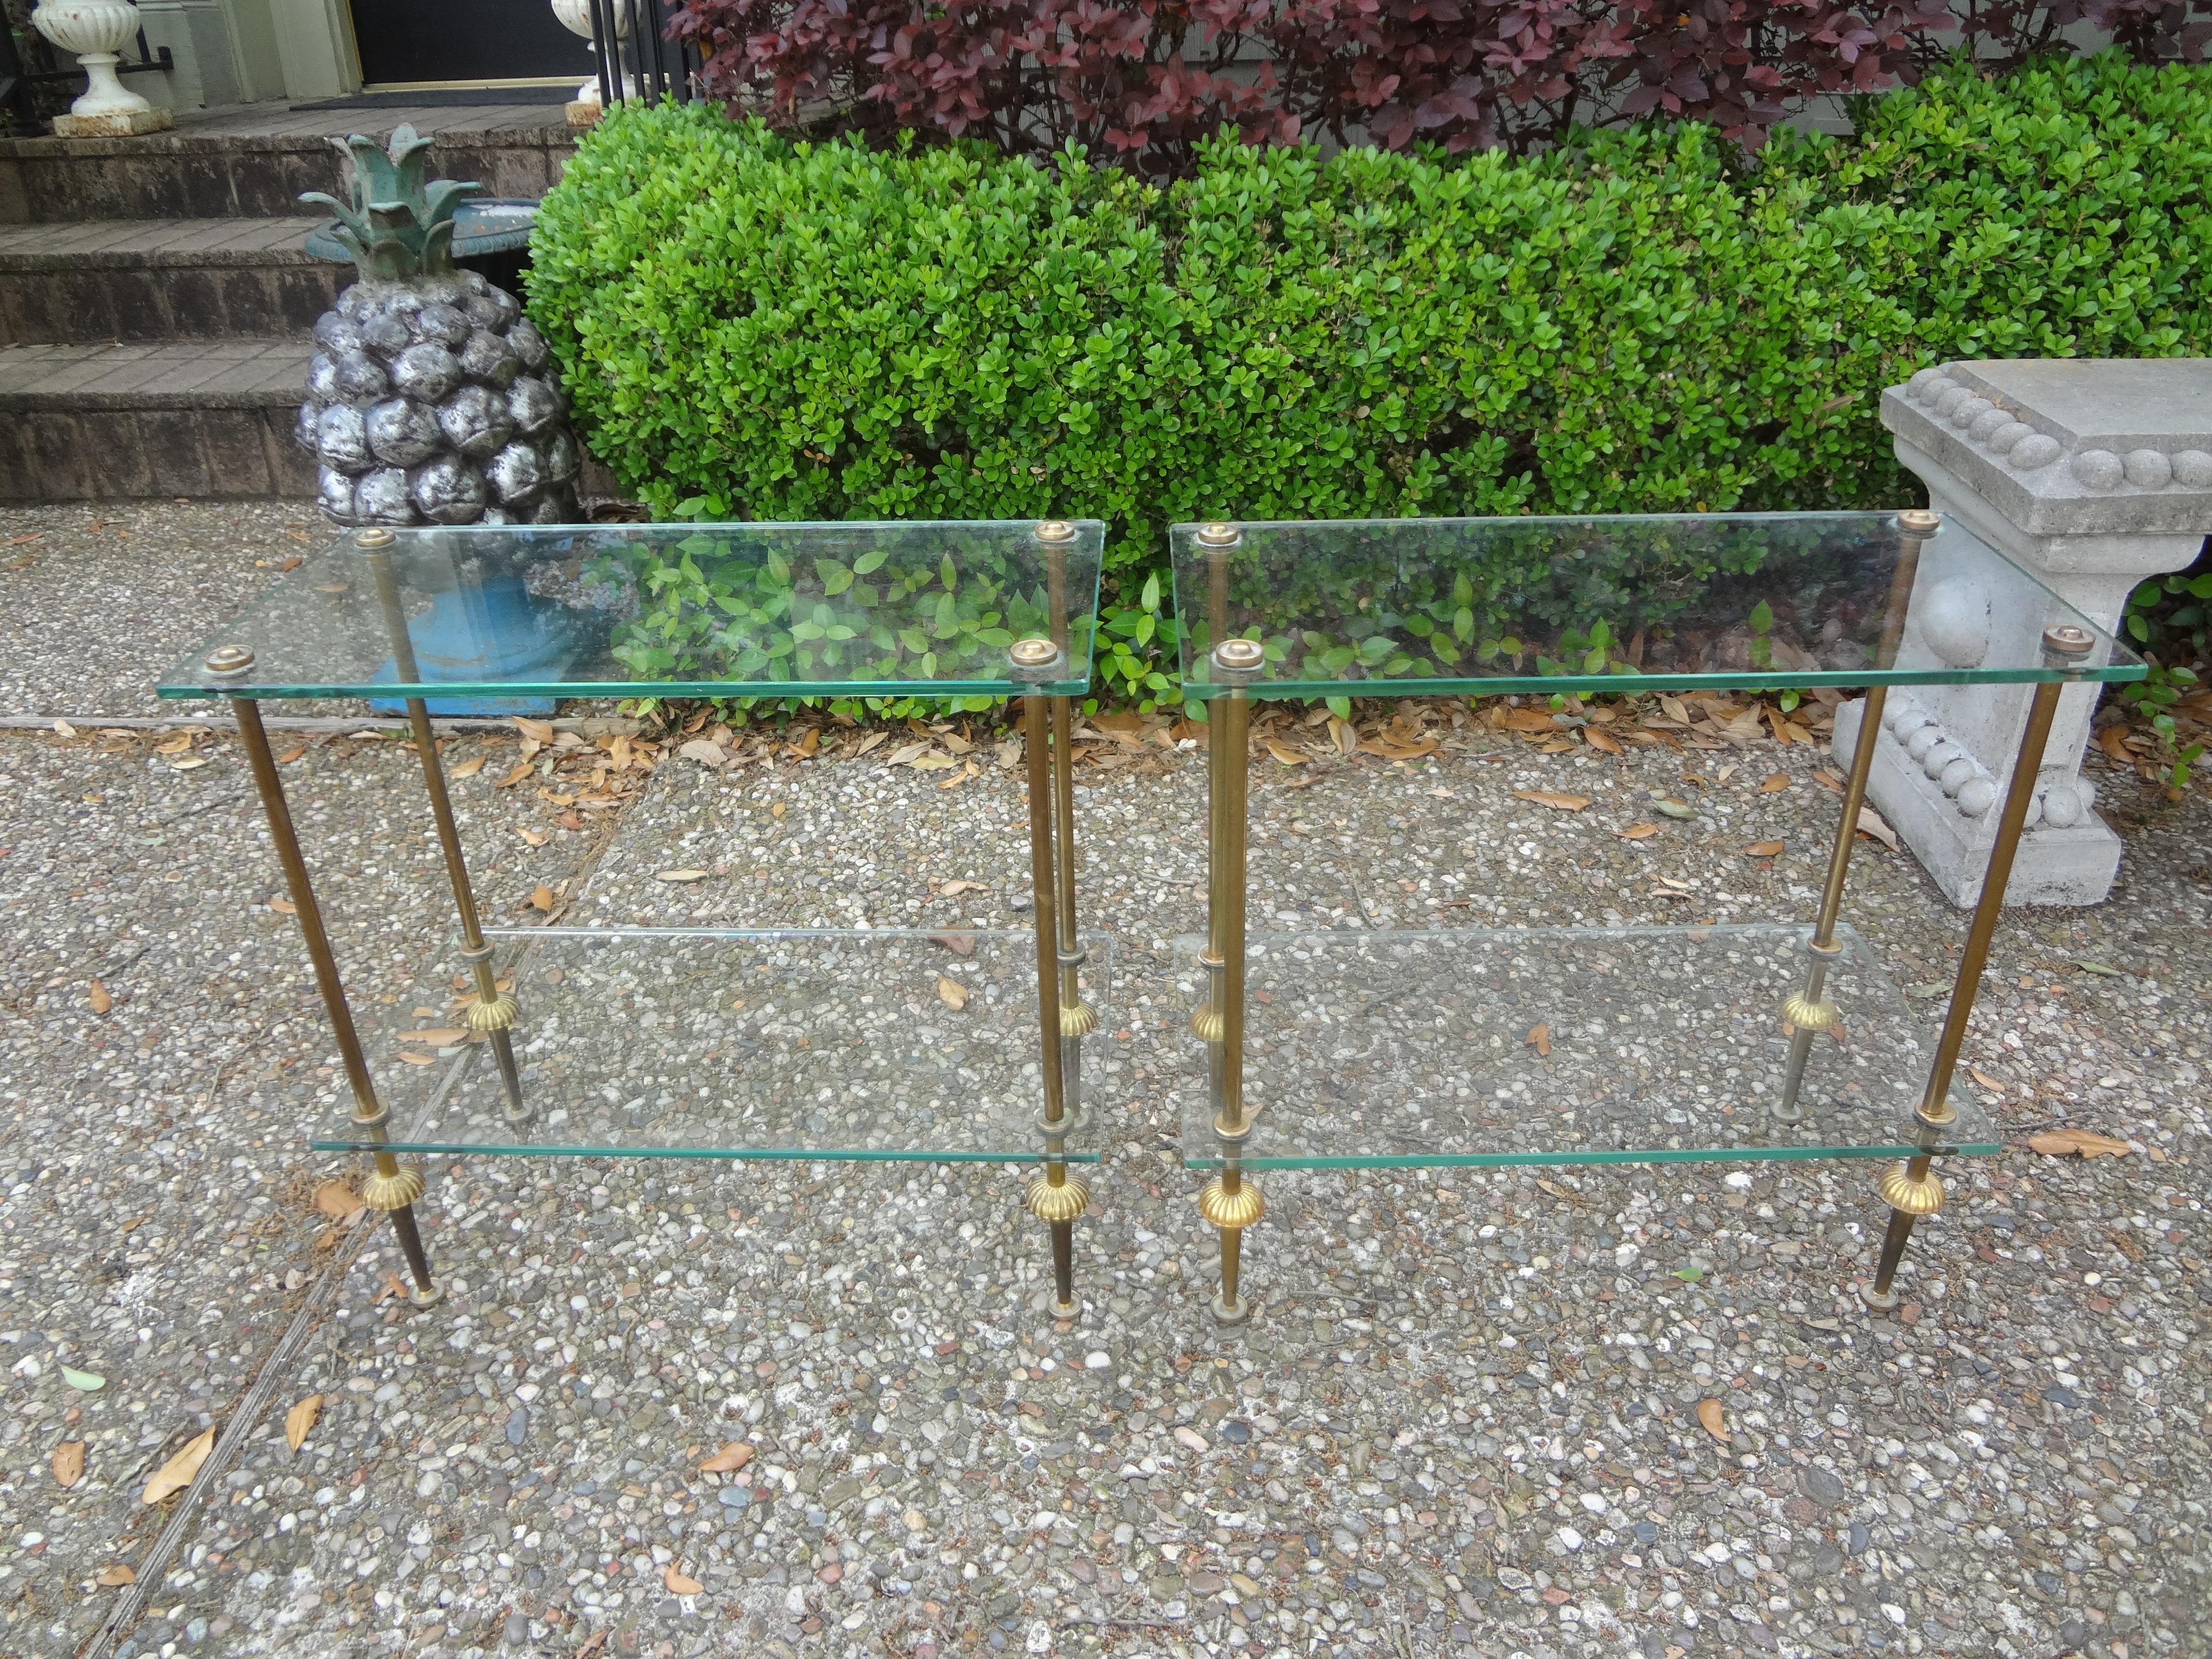 Pair of French Maison Bagues attributed brass and glass tables.
Striking pair of French Maison Bagues attributed brass and glass side tables. This gorgeous versatile pair of Maison Bagues tables or gueridons can be used together as a coffee table or